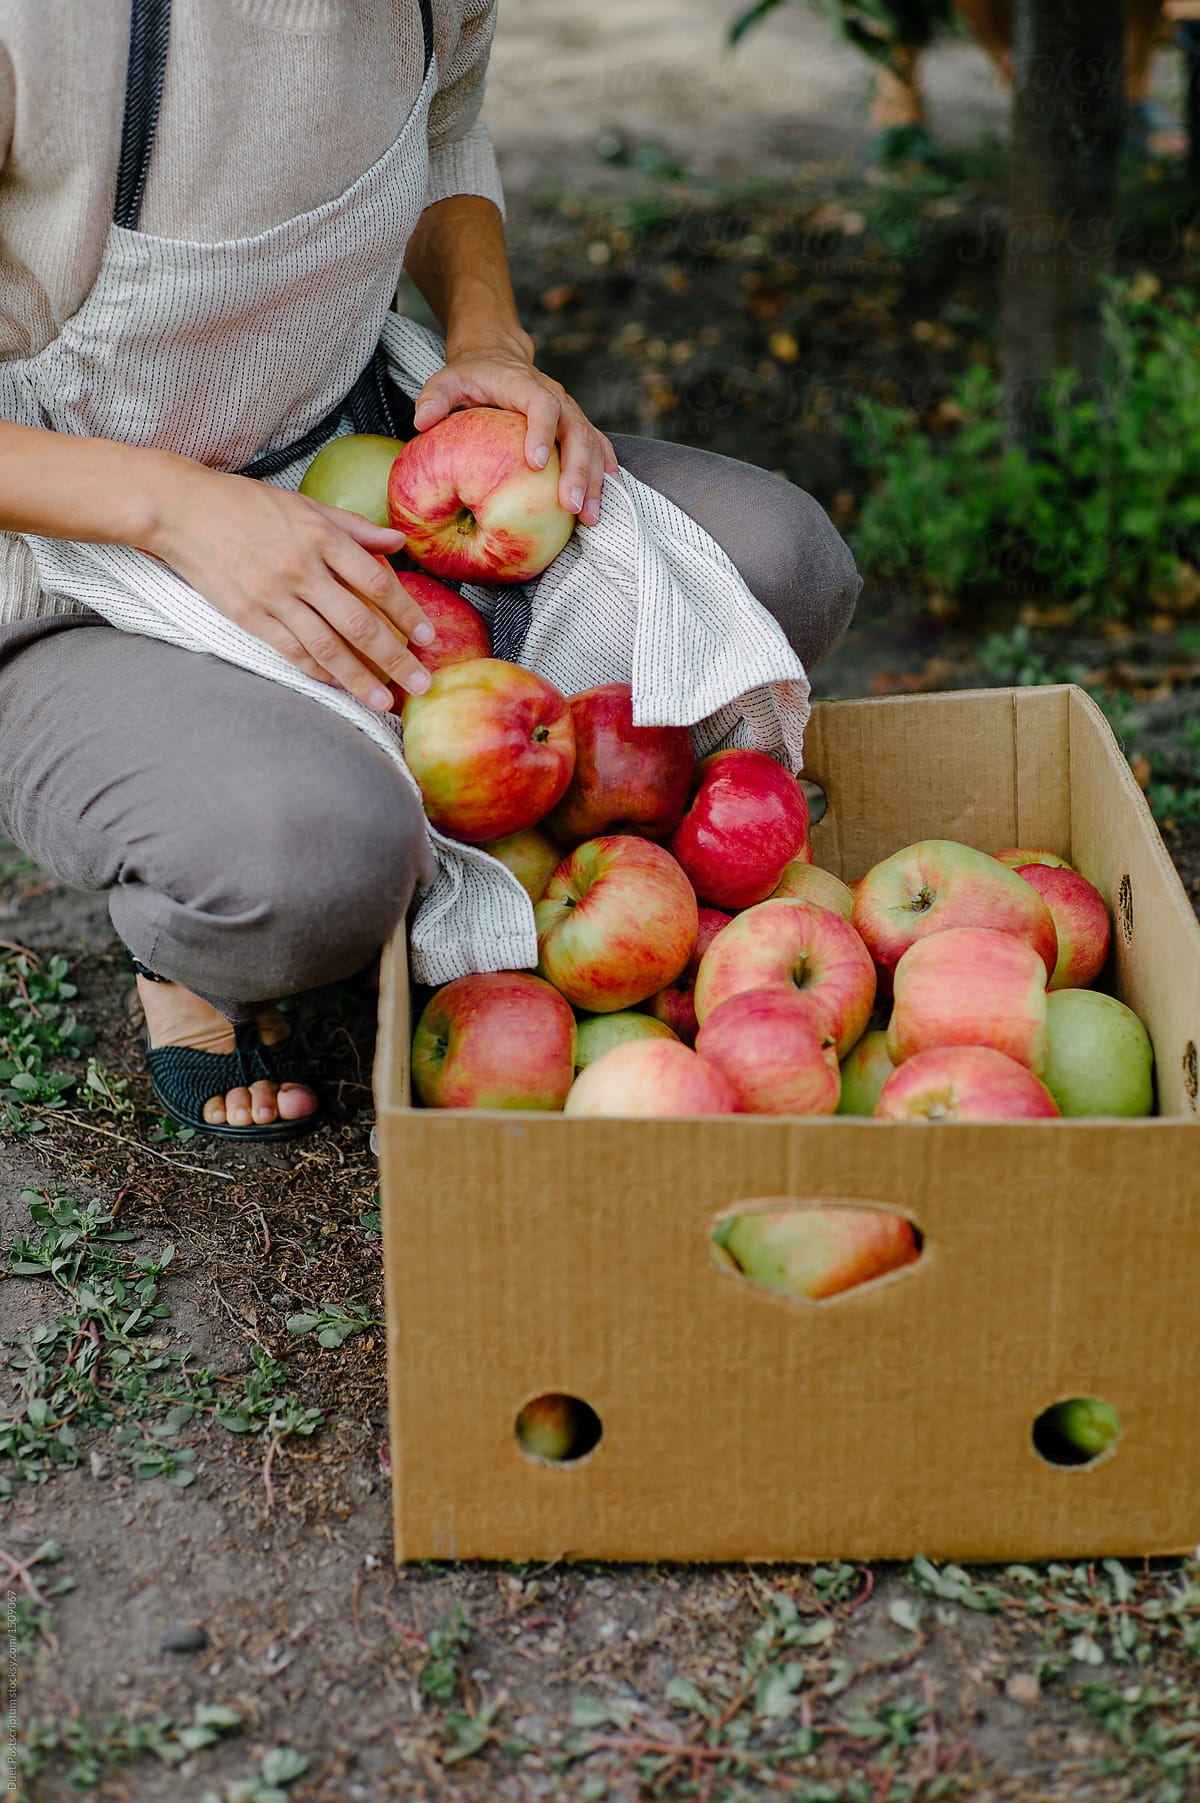 WomanWoman putting apples to boxholding apples in garden